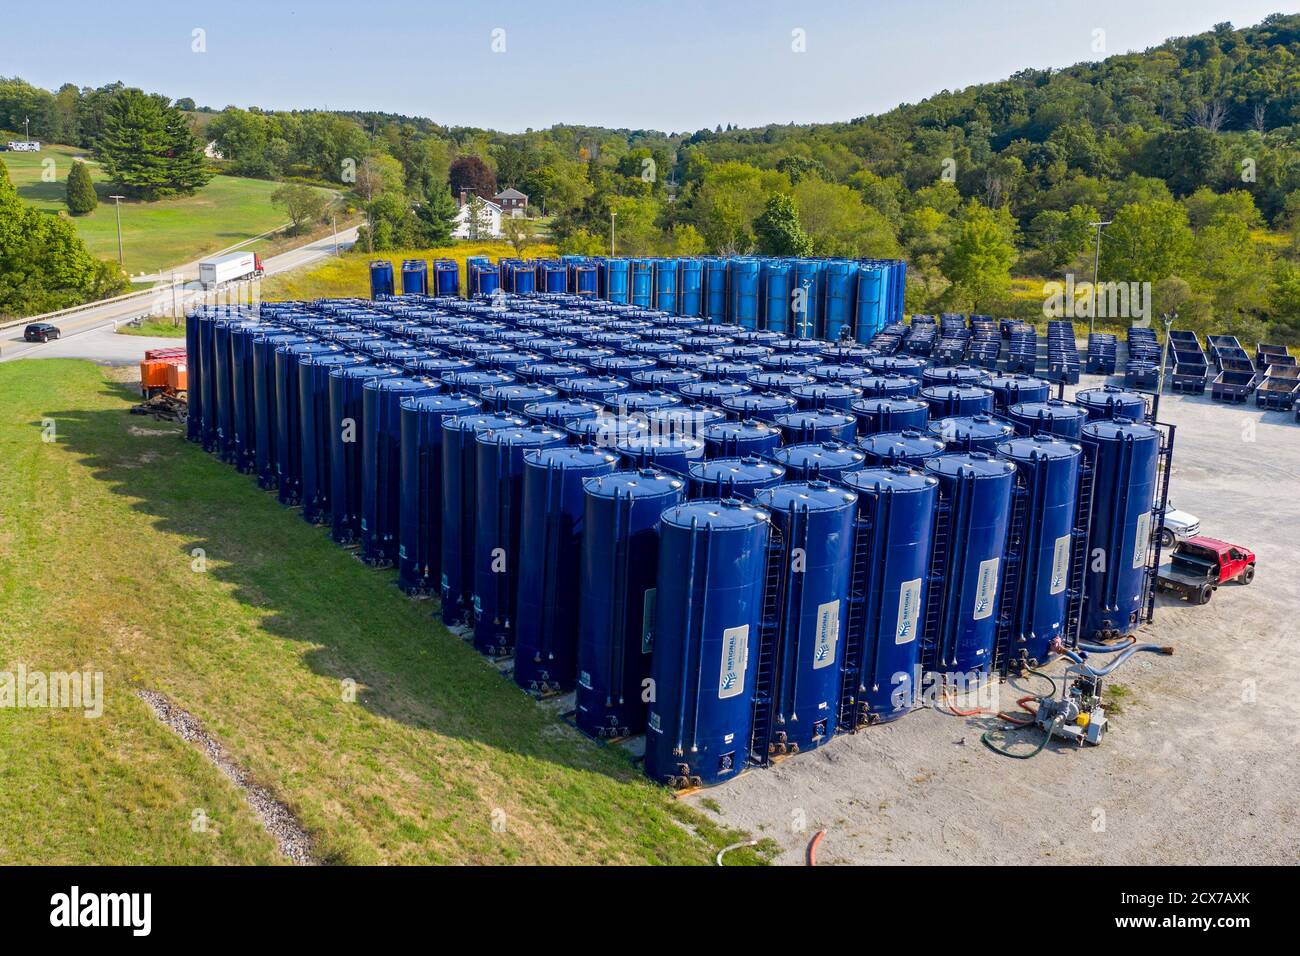 Hickory, Pennsylvania - Vertical frac tanks, used to store water and other materials for hydraulic fracturing, in rural southwest Pennsylvania where f Stock Photo